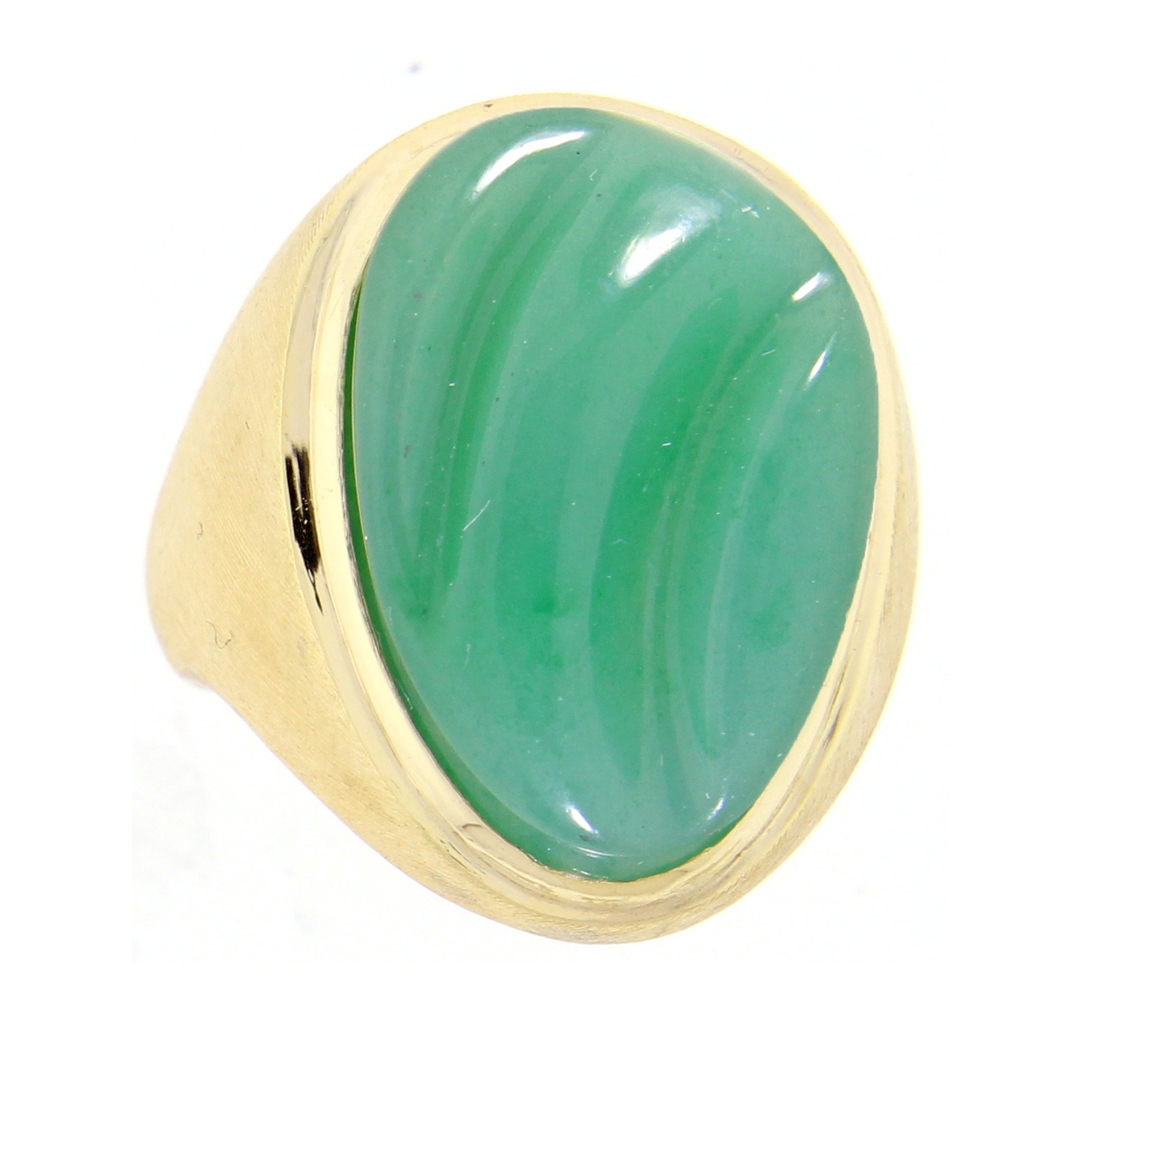 Burl-Marx Forma Livre Sculpted Green Chrysoprase Ring at pampillonia